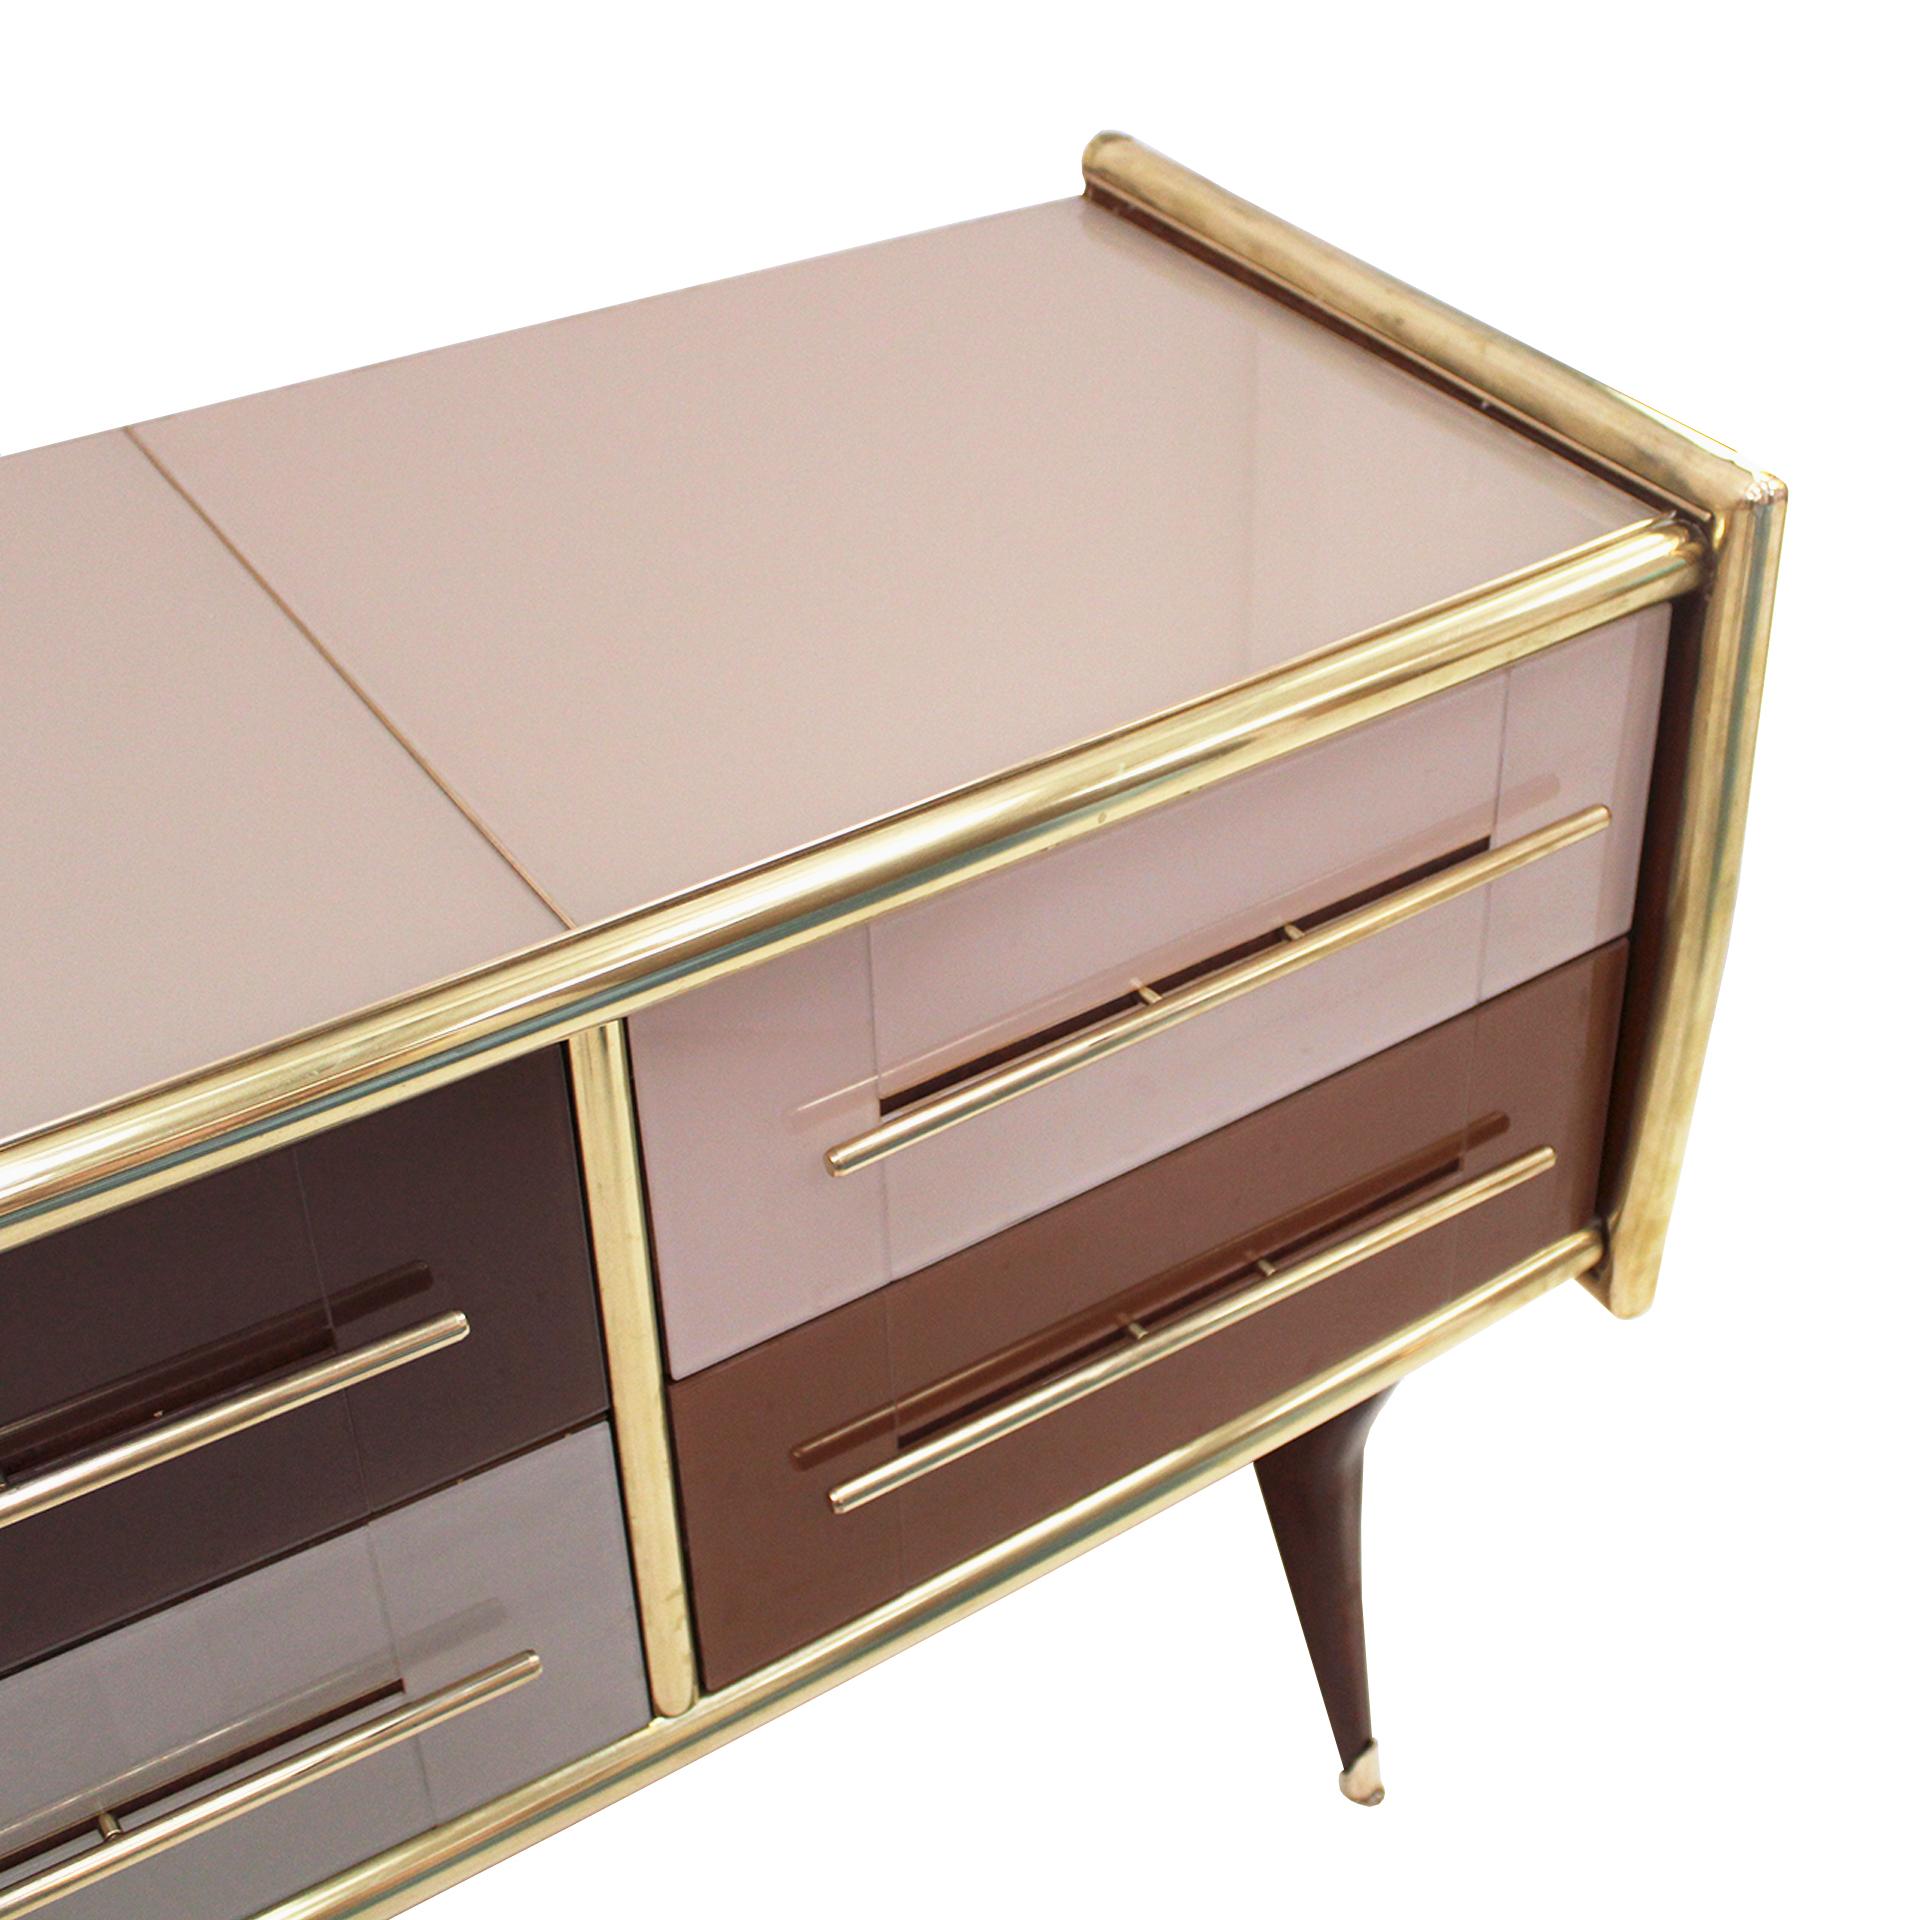 Mid-20th Century Mid-Century Modern Solid Wood and Colored Glass Italian Sideboard